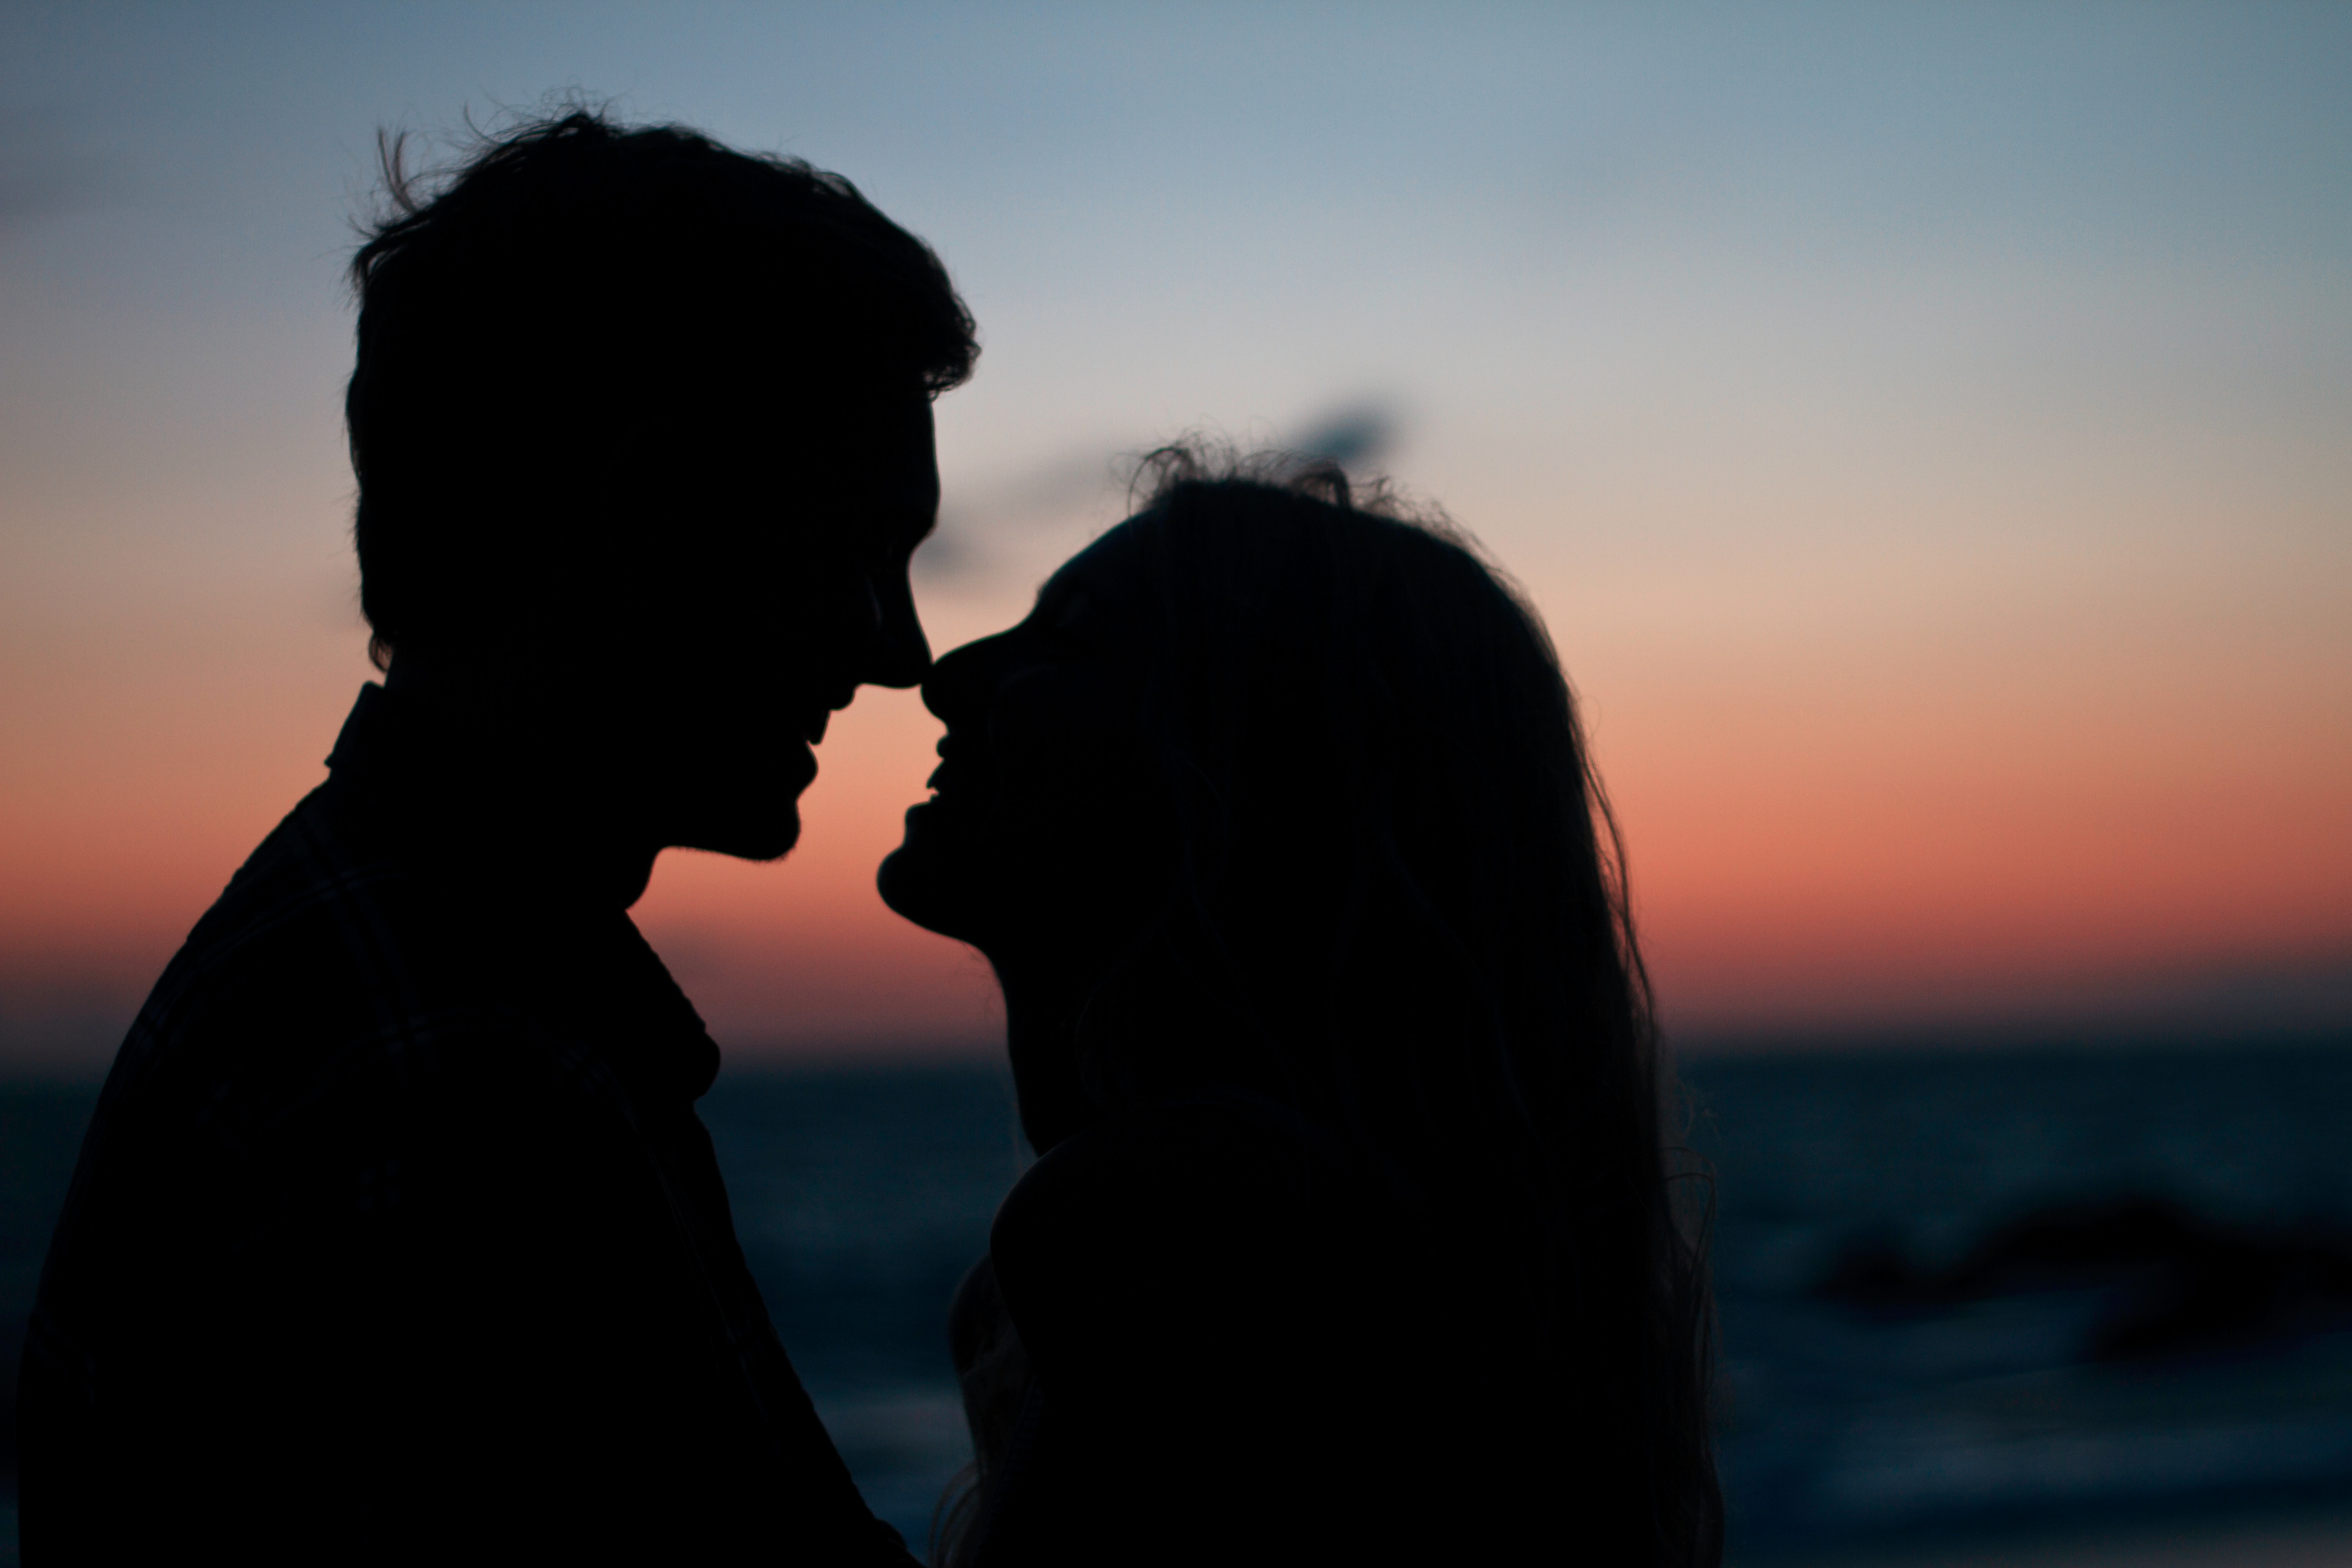 A silhouette of a man and a woman about to kiss on during sunset  | Source: Unsplash